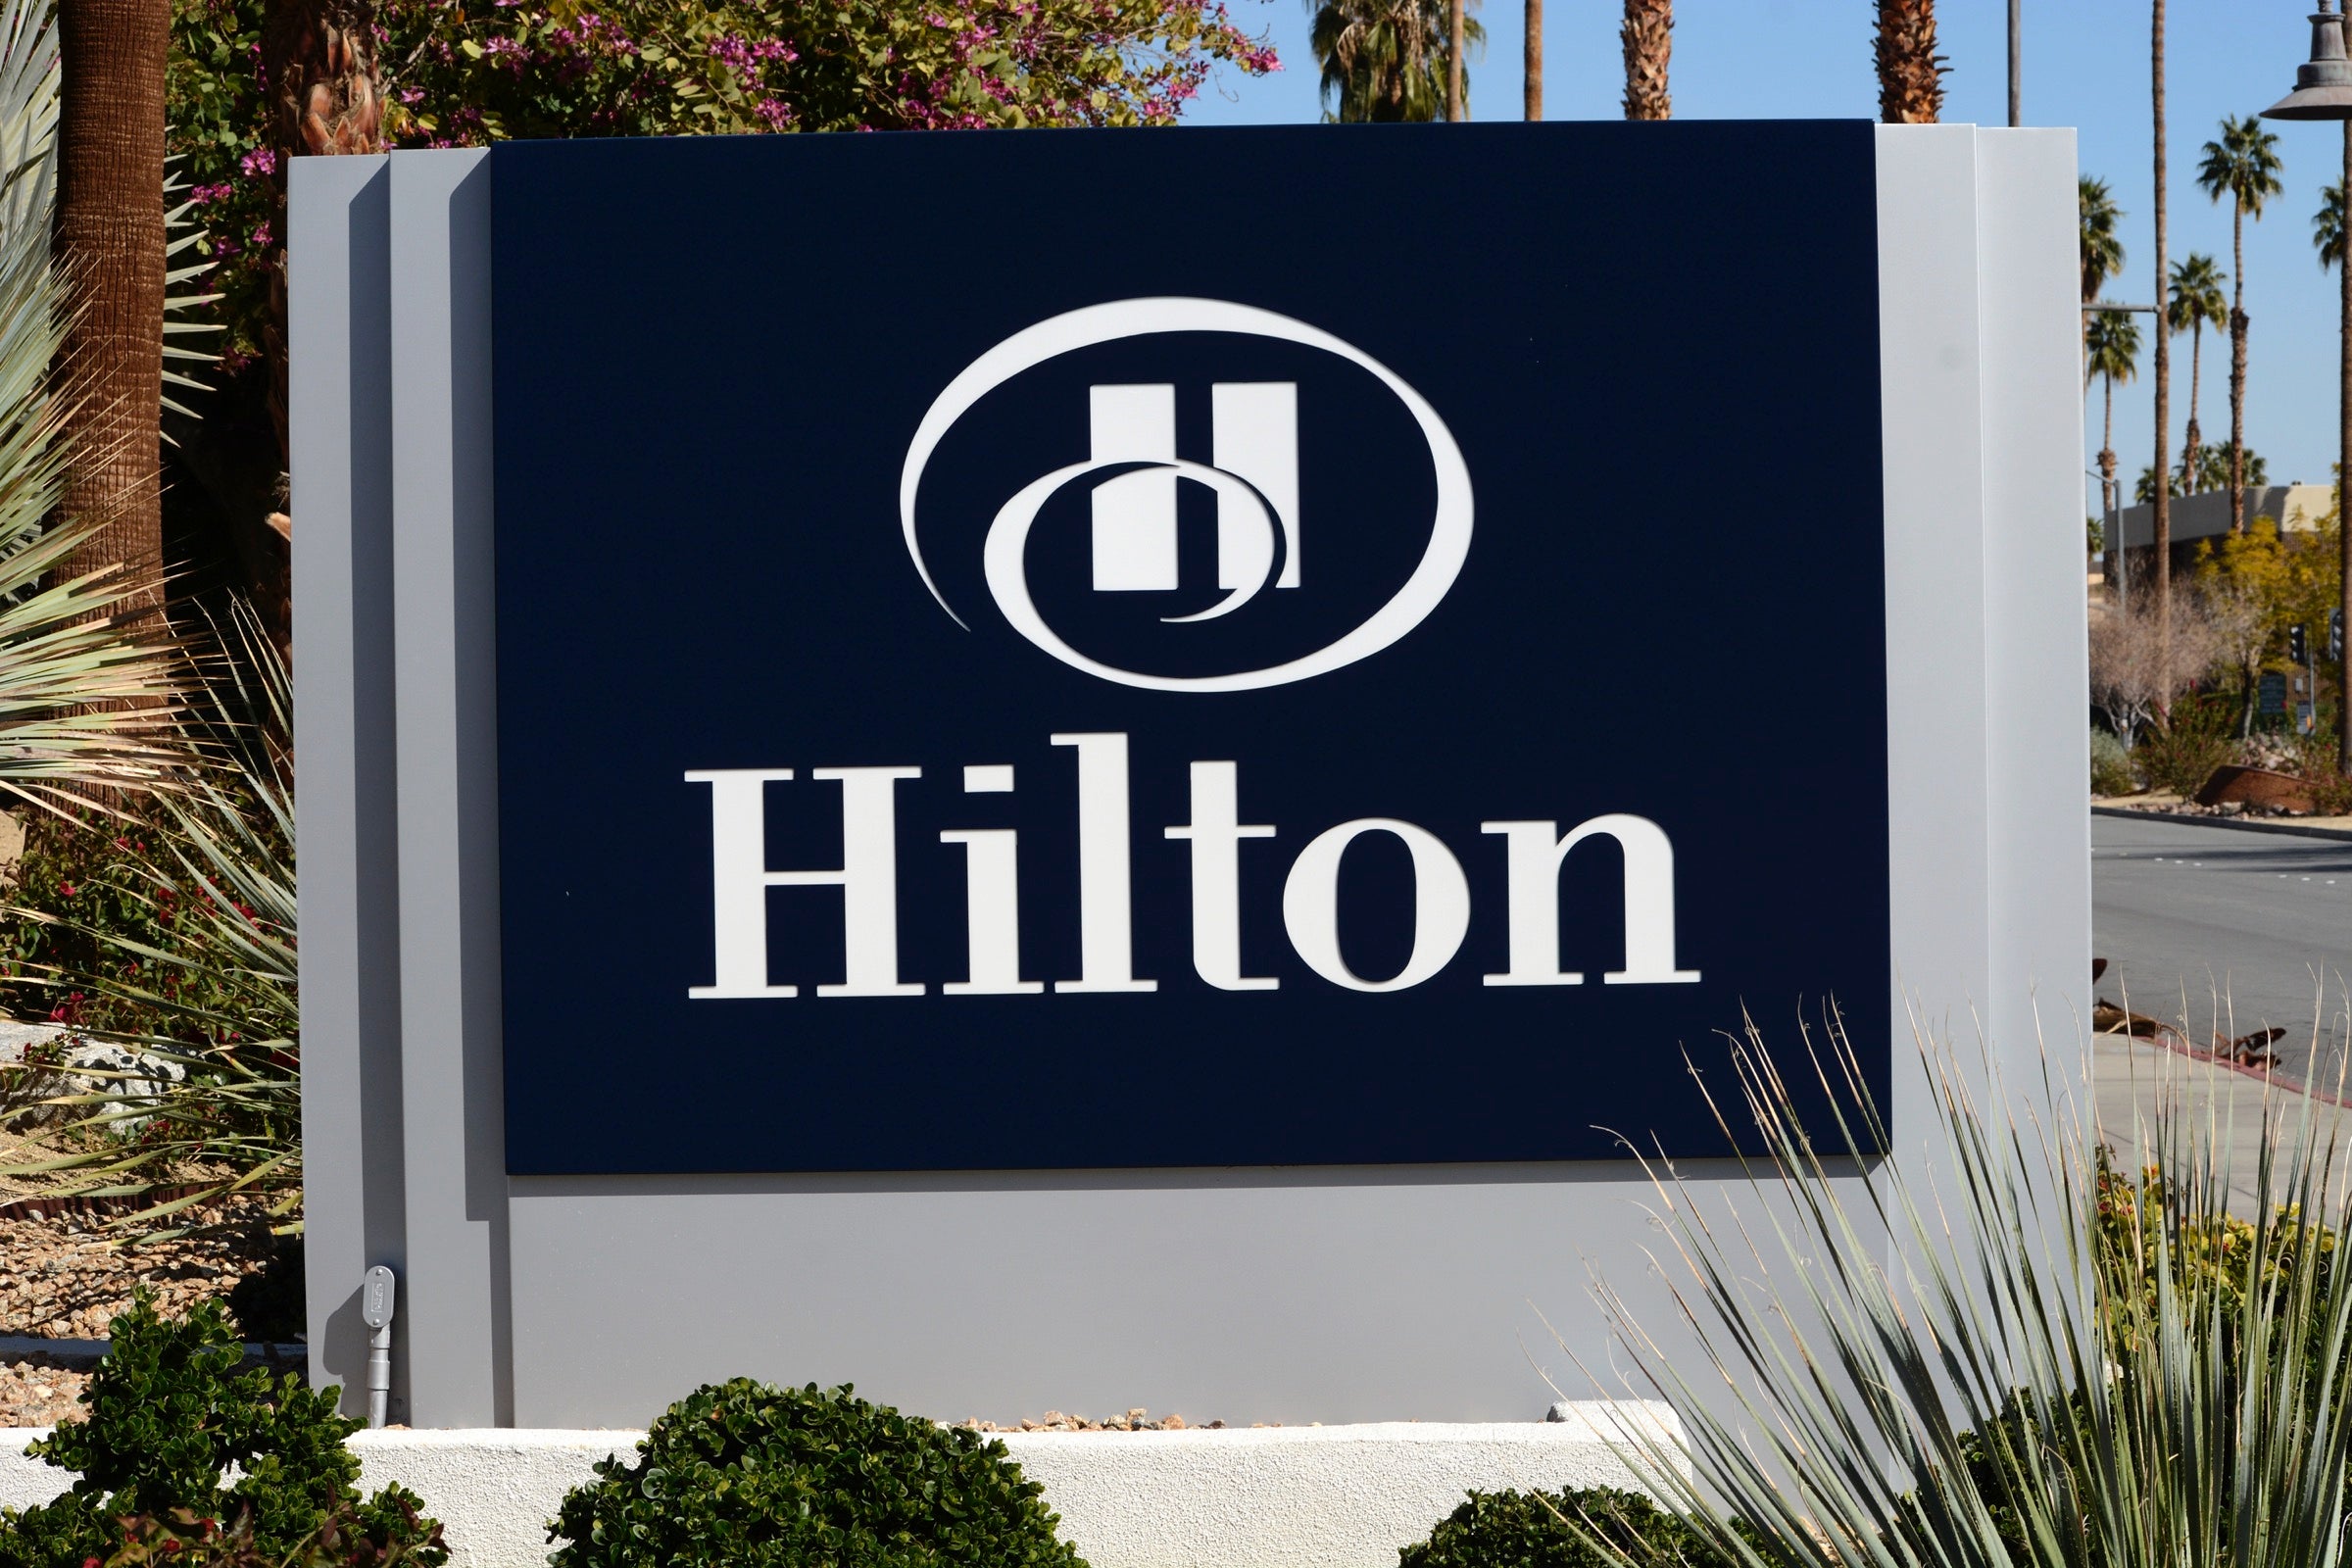 Sign for a Hilton hotel